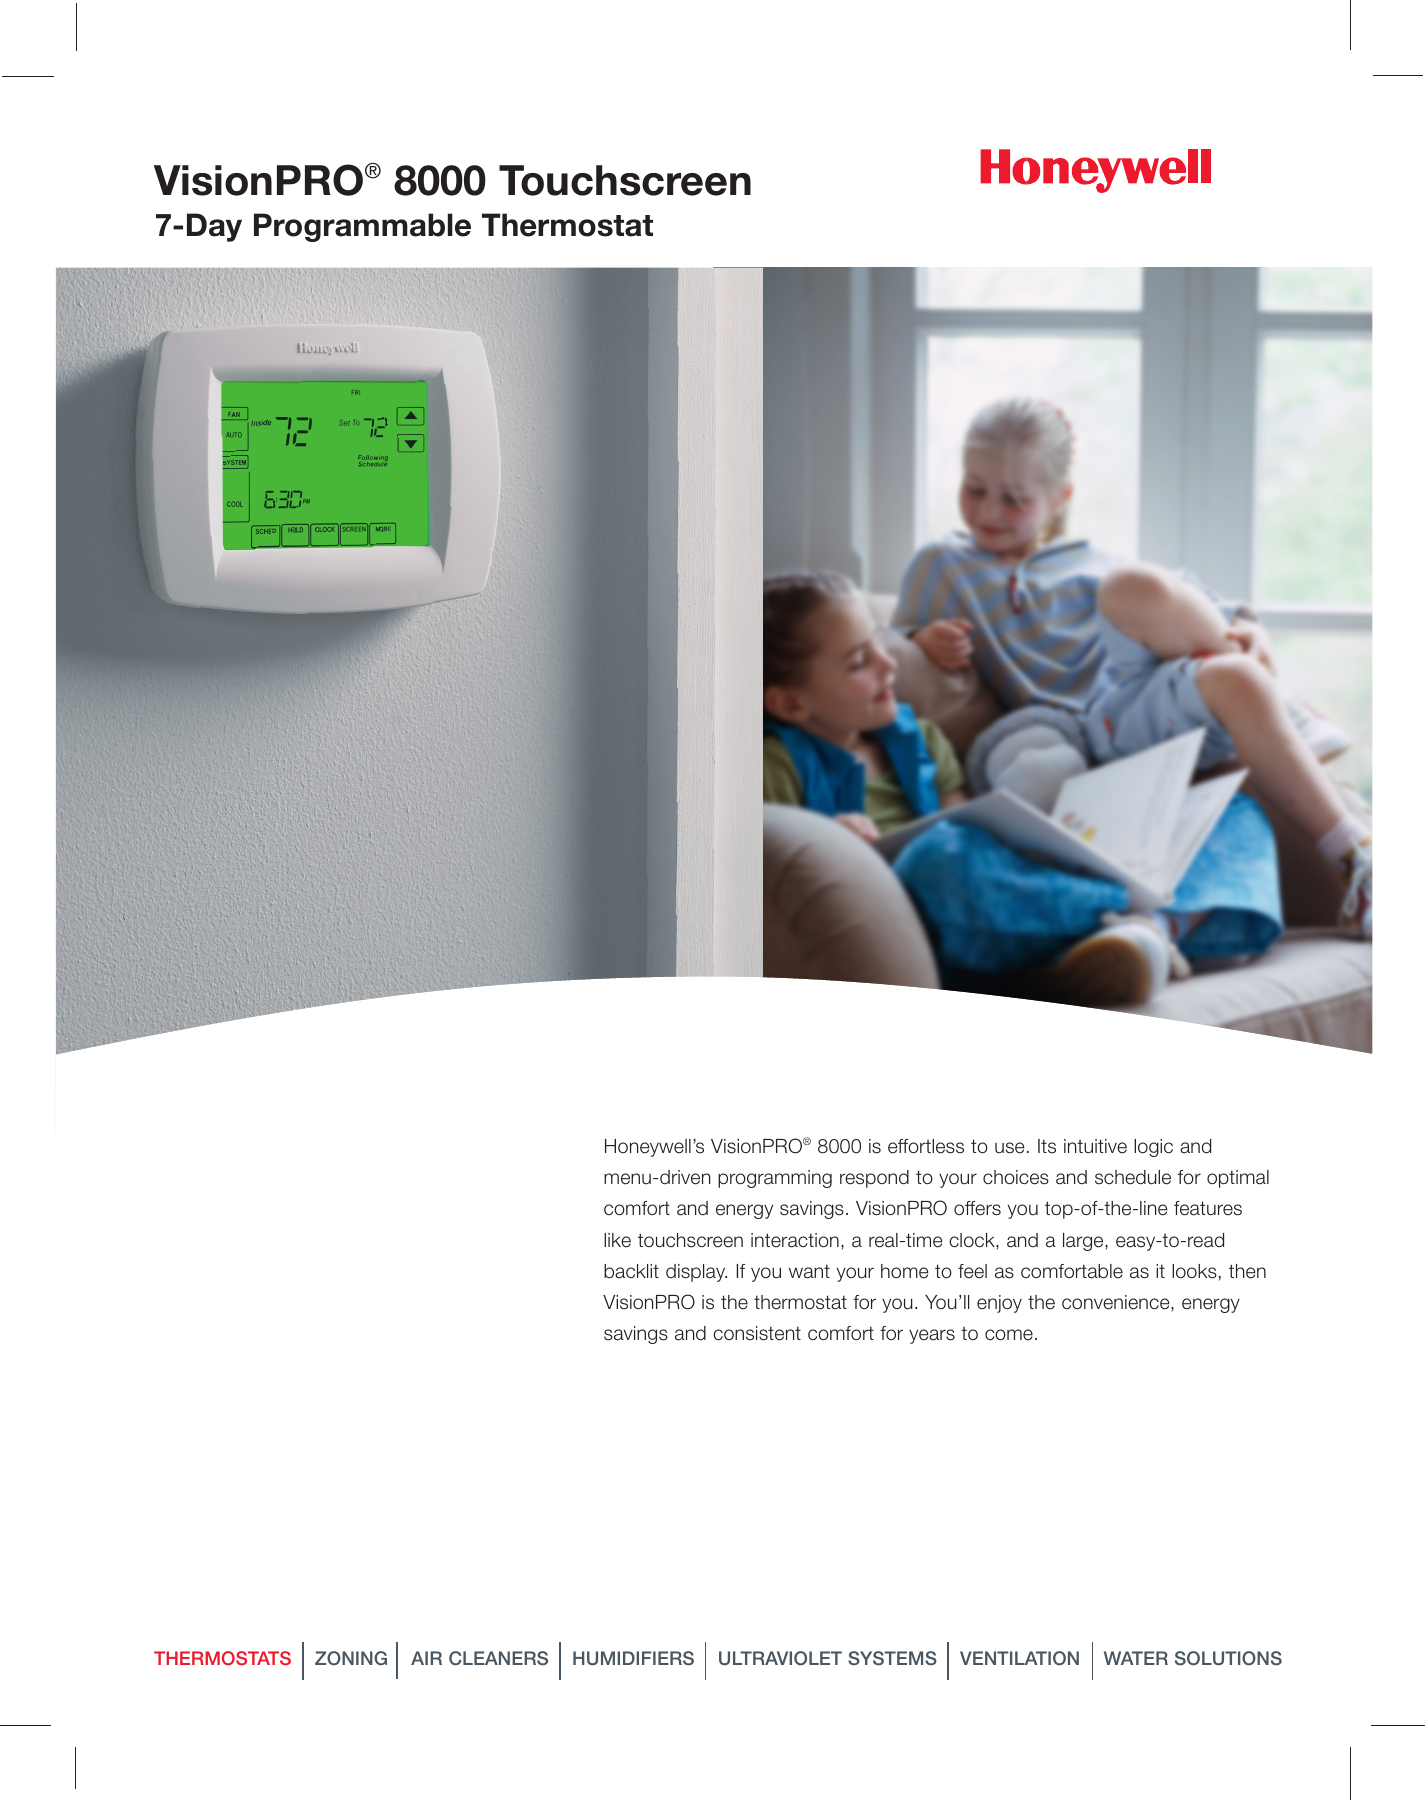 Page 1 of 2 - Honeywell Honeywell-Visionpro-8000-Users-Manual- 50-9104 - VisionPRO 8000 Touchscreen 7-Day Programmable Thermostat  Honeywell-visionpro-8000-users-manual